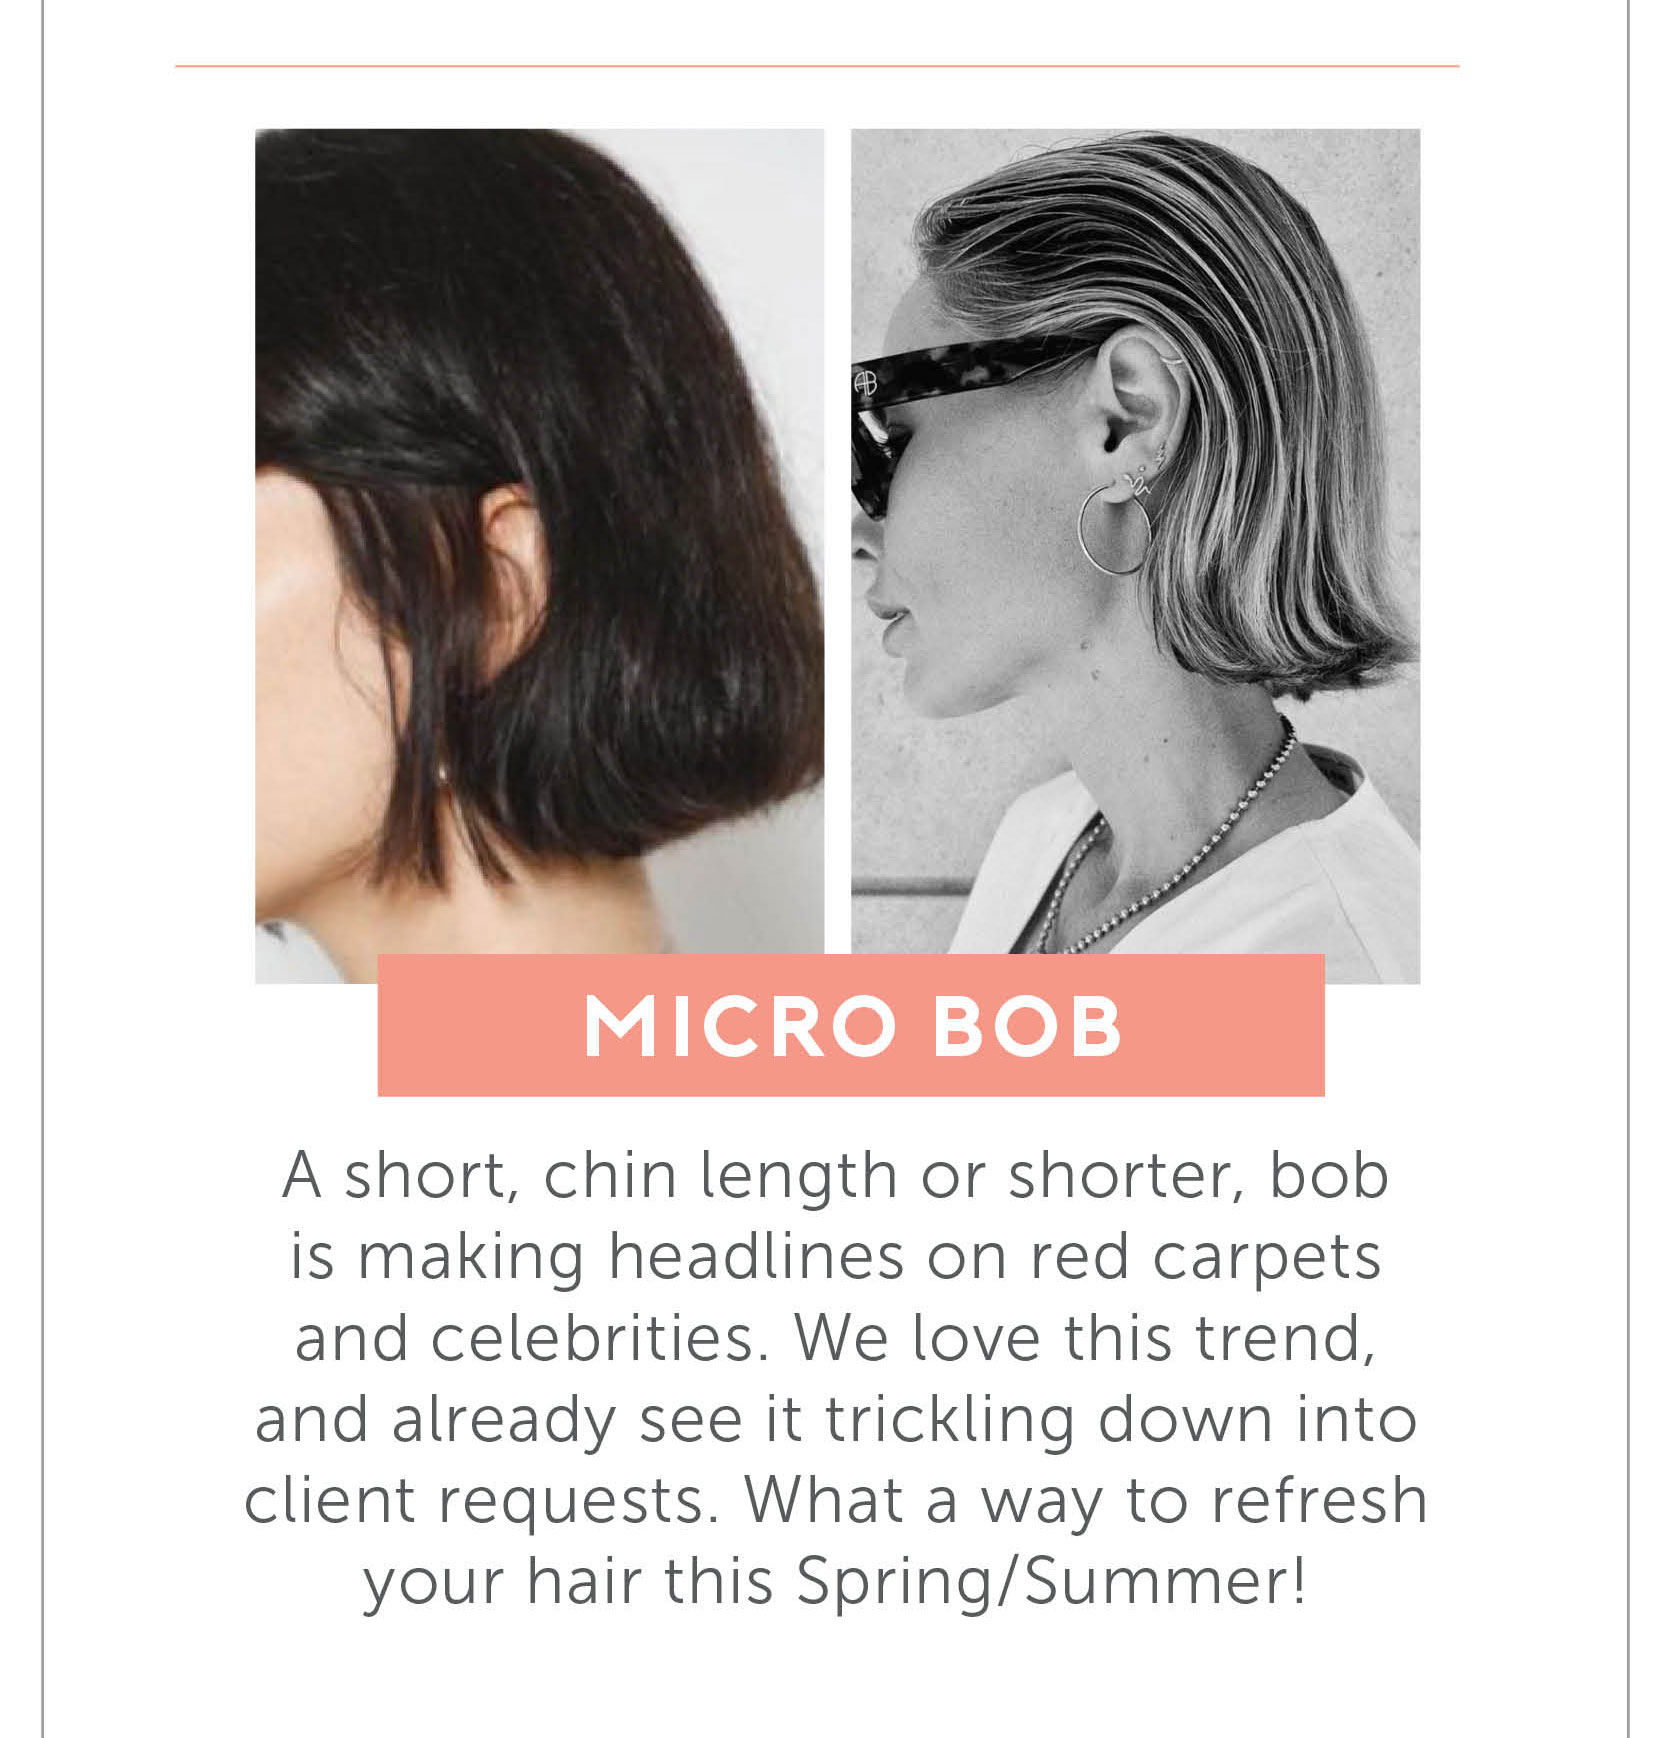 Micro Bob - A short, chin length or shorter, bob is making headlines on red carpets and celebrities. We love this trend, and already see it trickling down into client requests. What a way to refresh your hair this Spring/Summer!